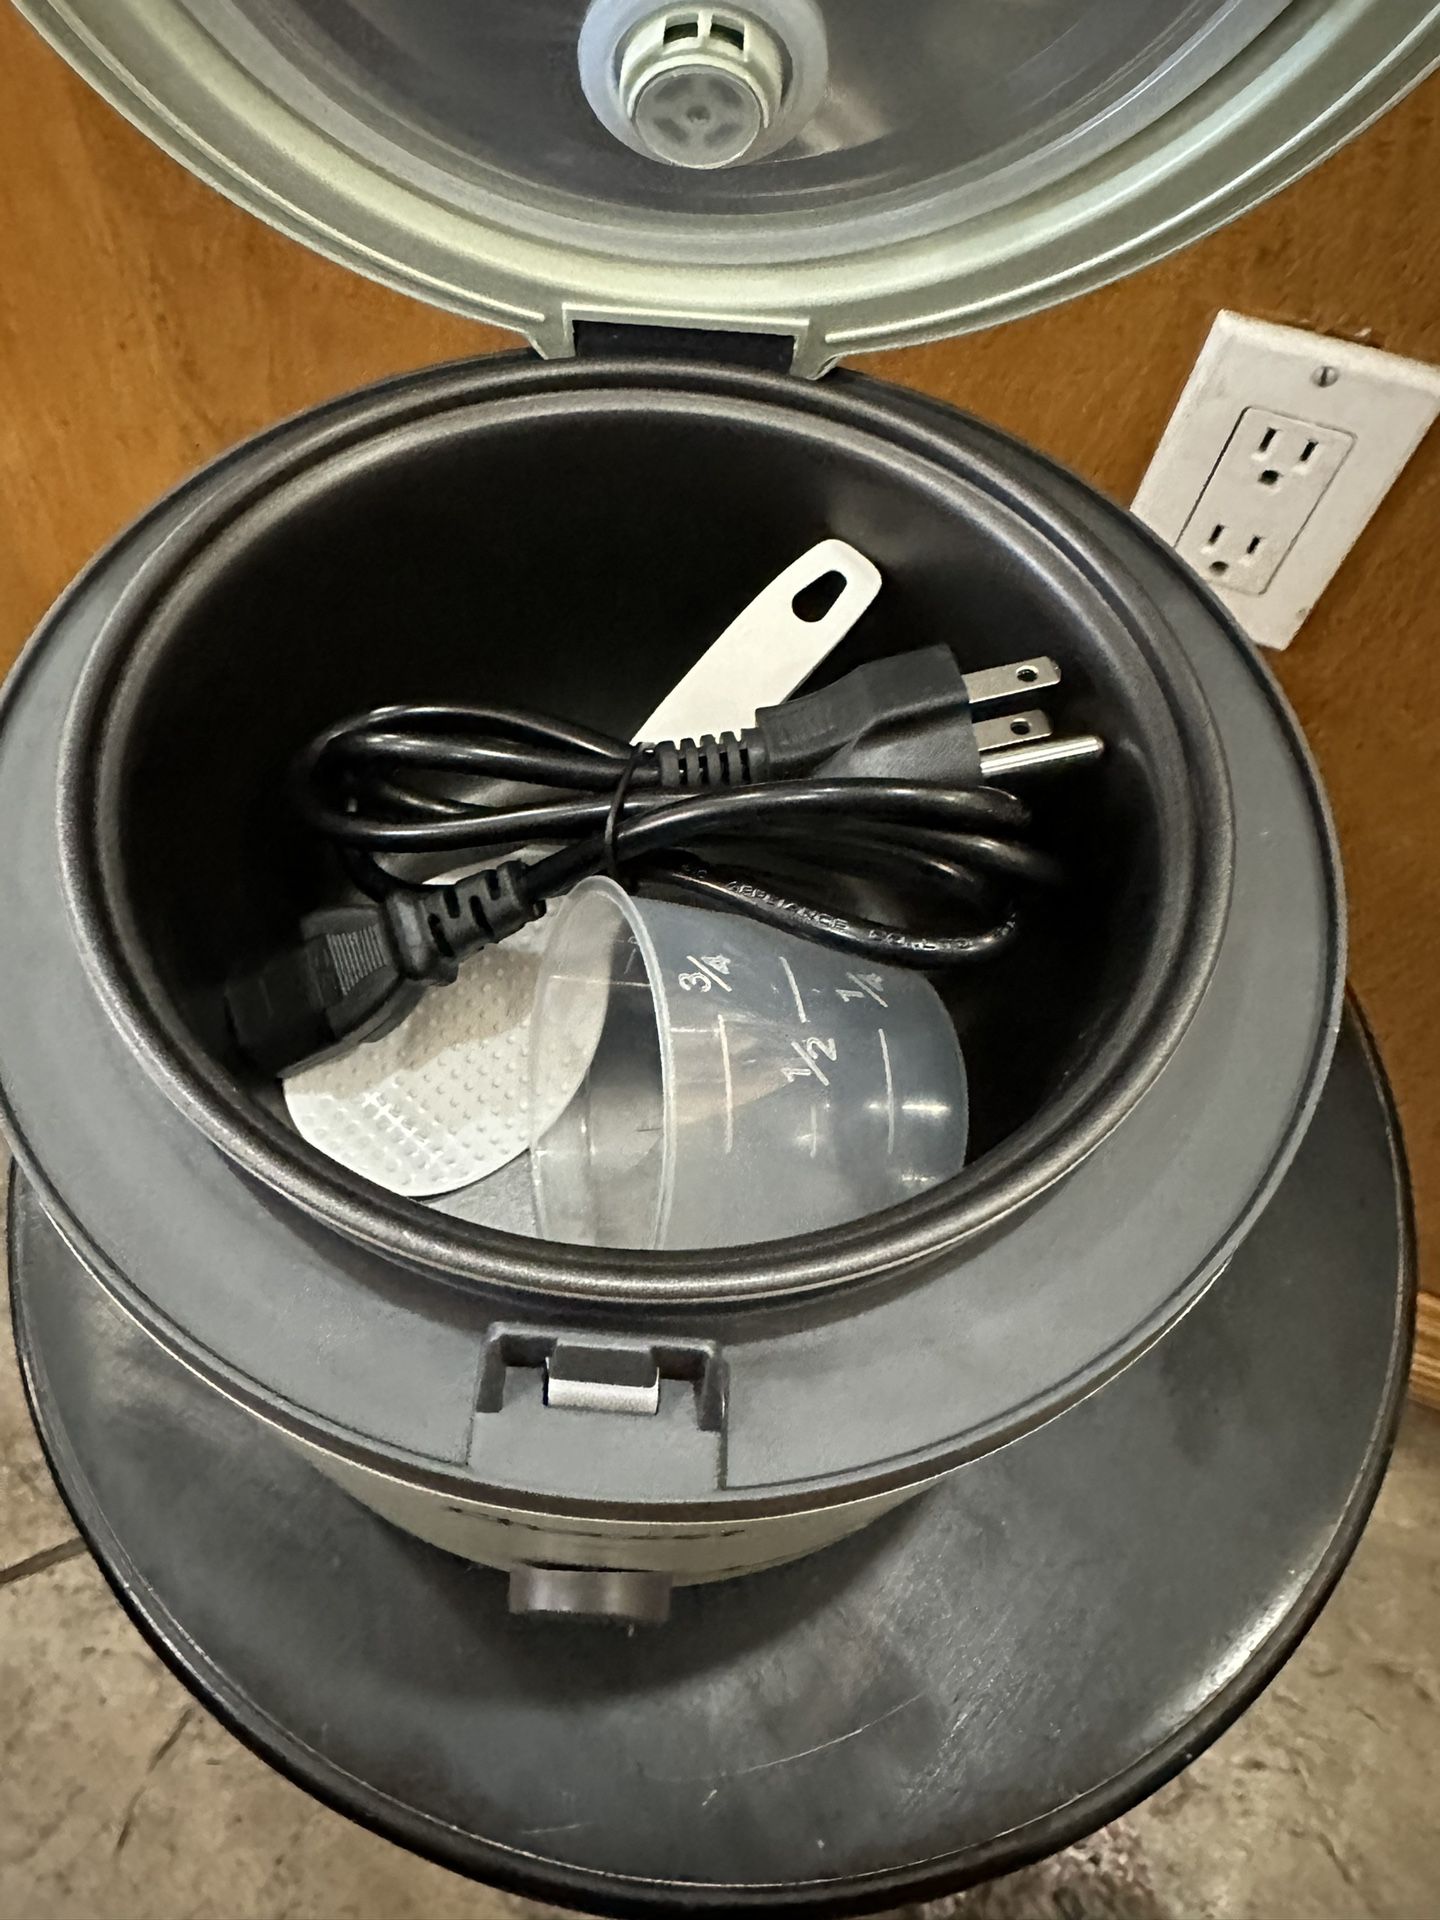 CHACEEF Rice Cooker 3-Cups Uncooked, 1.5L Small Rice Cooker with Non-stick  coating, BPA Free, Portable Mini Rice Cooker for Sale in Las Vegas, NV -  OfferUp